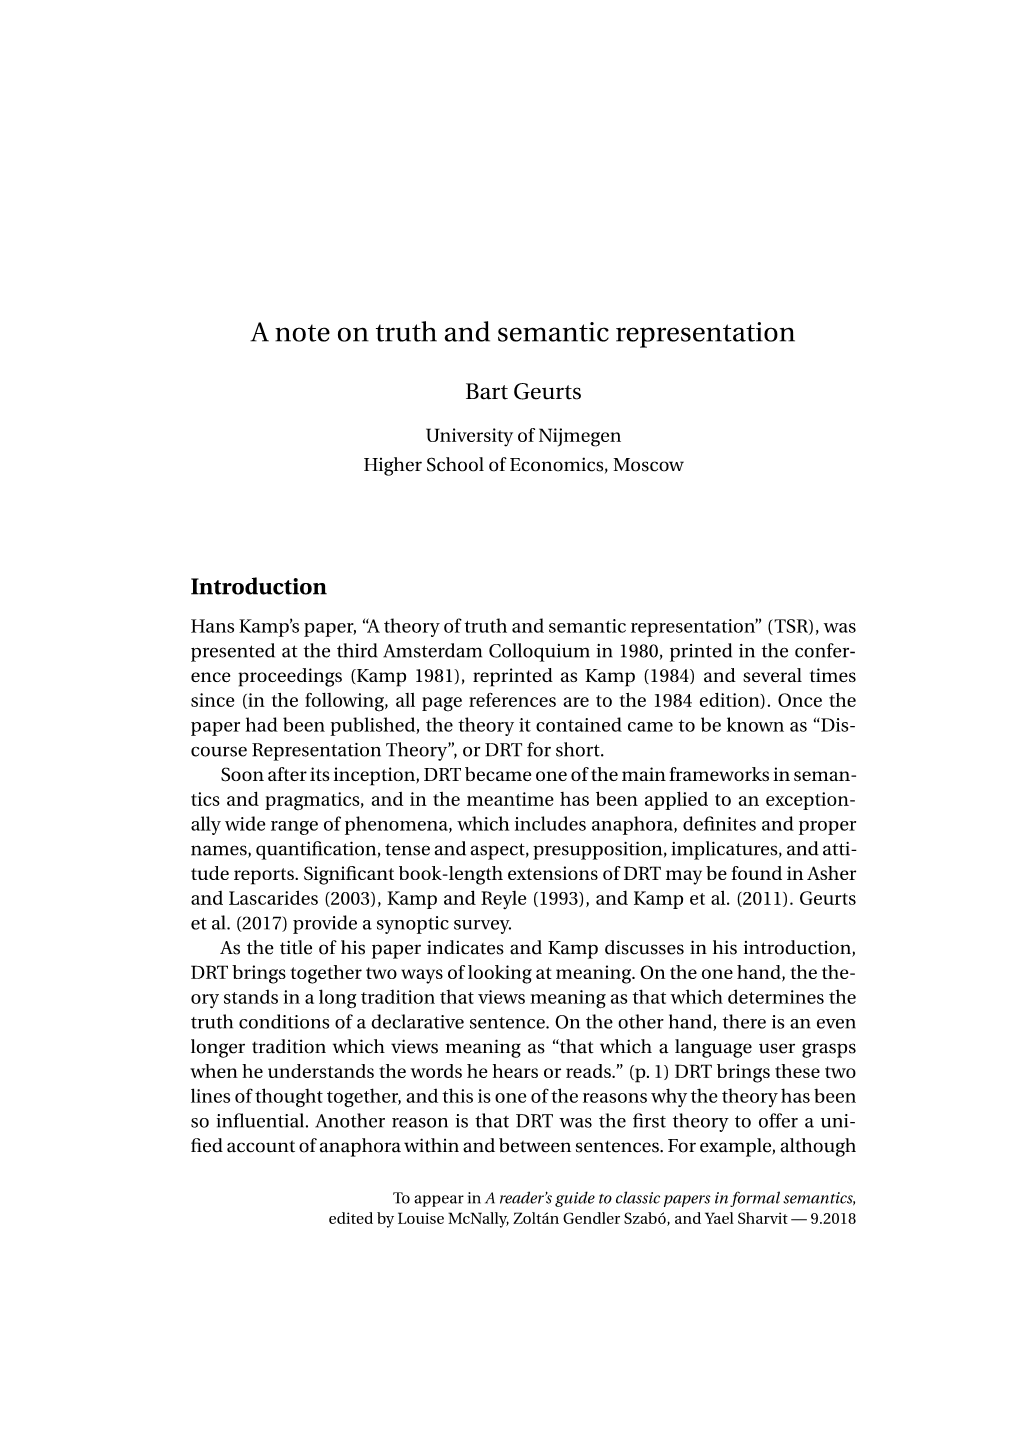 A Note on Truth and Semantic Representation